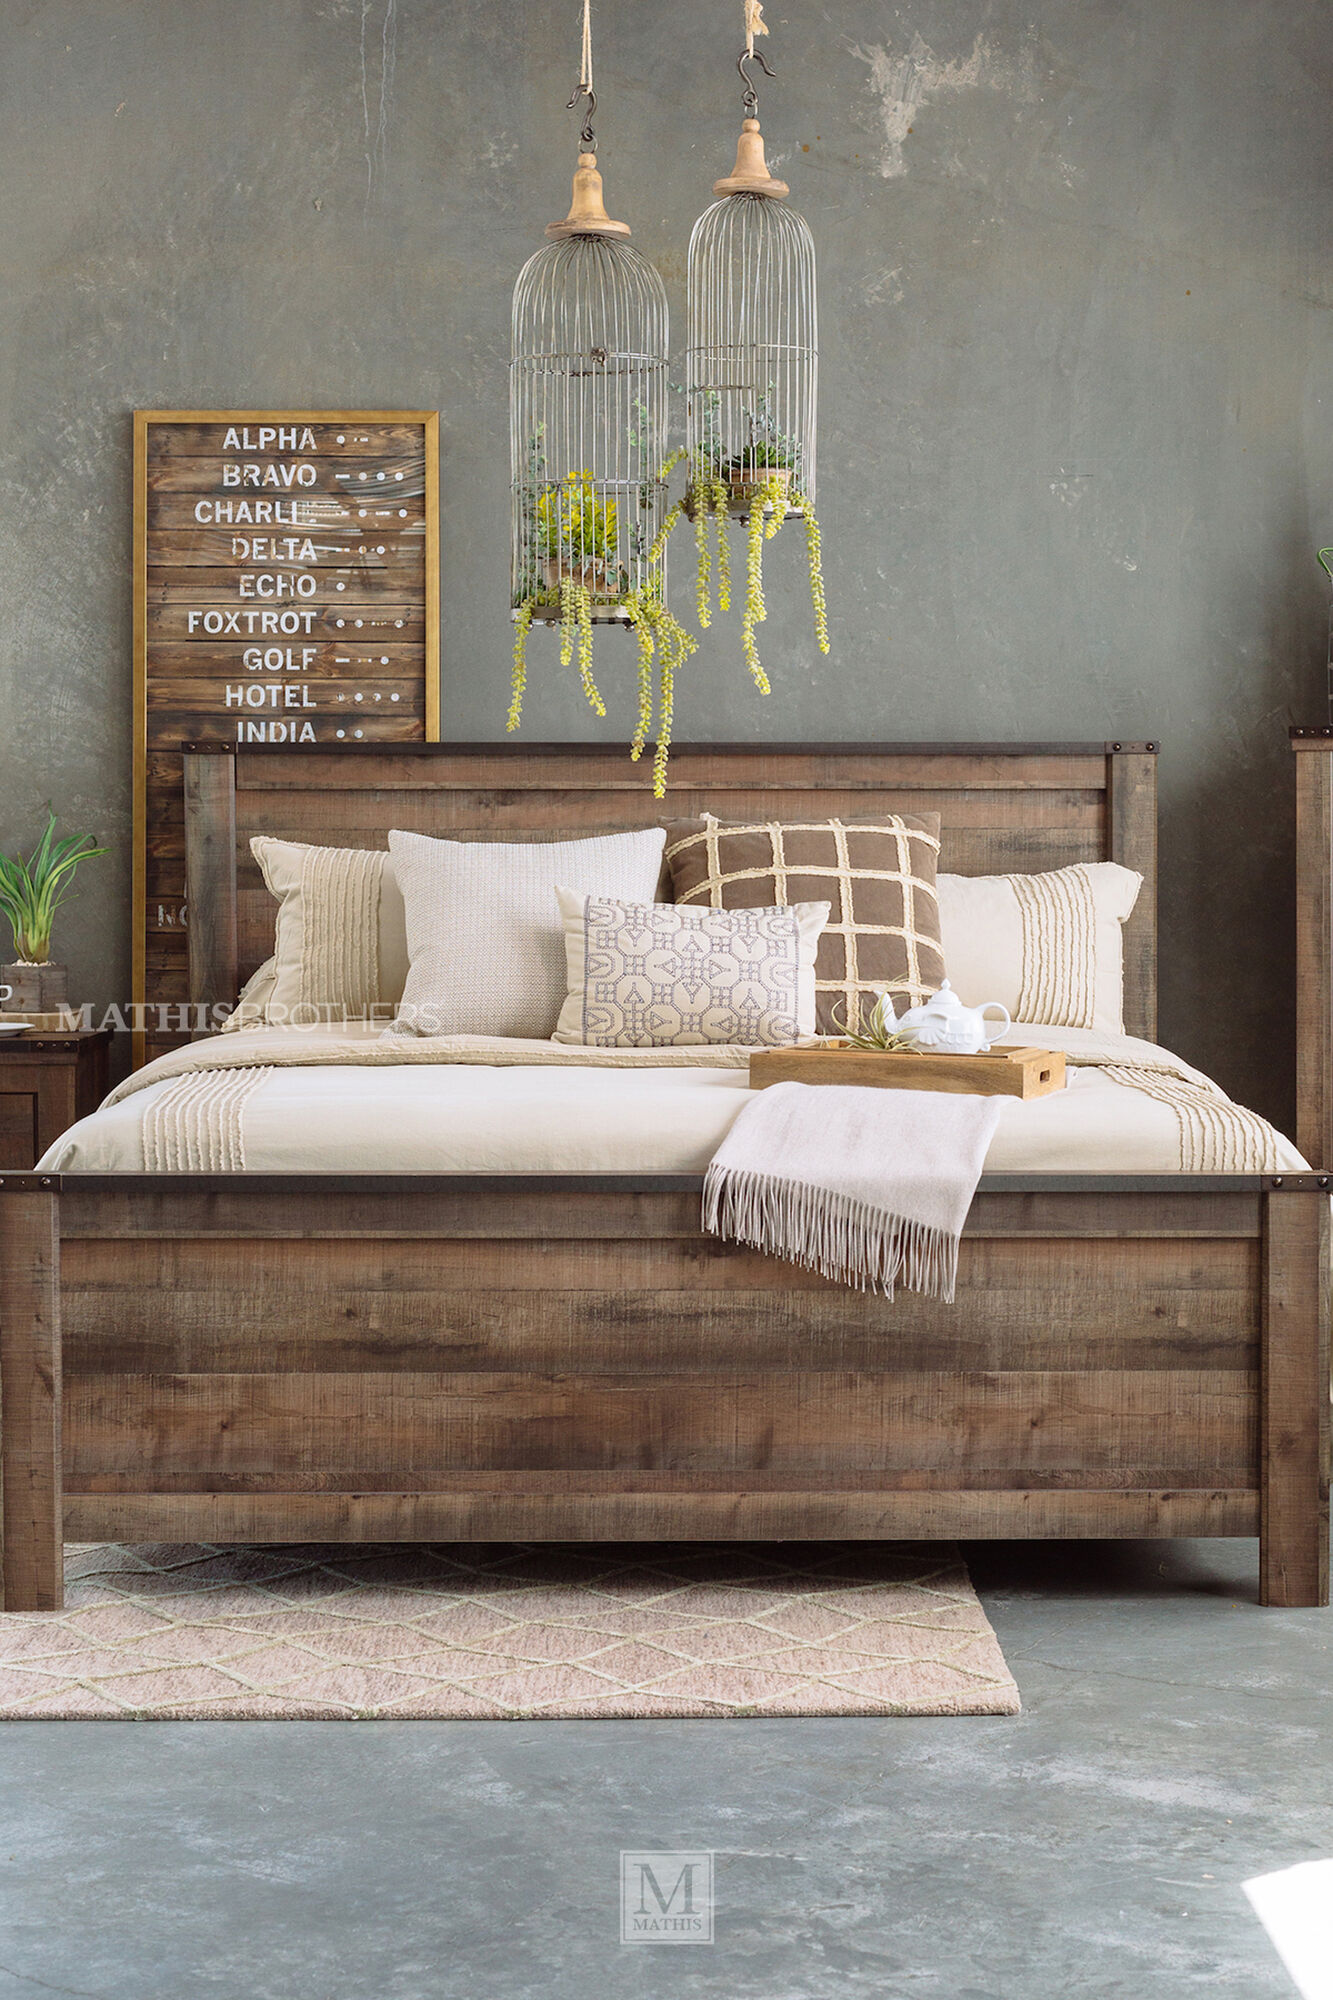 Four-Piece Rustic Farmhouse Bedroom Set in Brown | Mathis ...